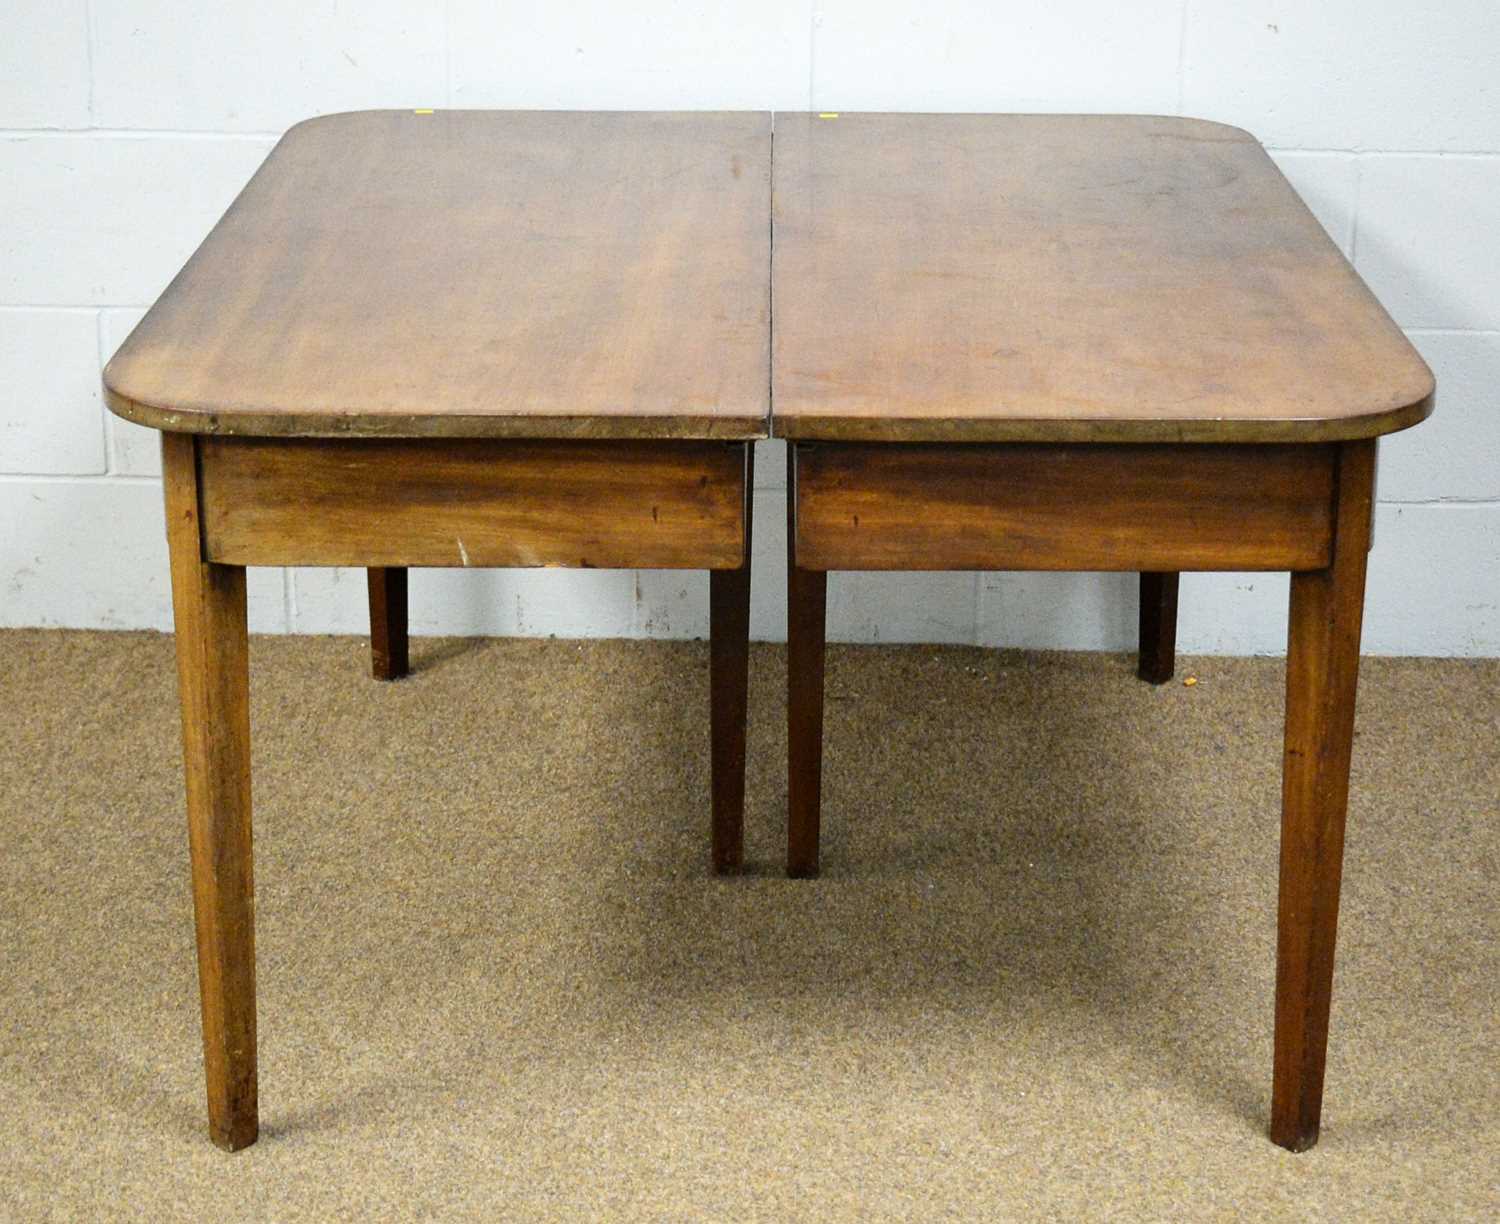 A 19th Century mahogany two-piece dining table